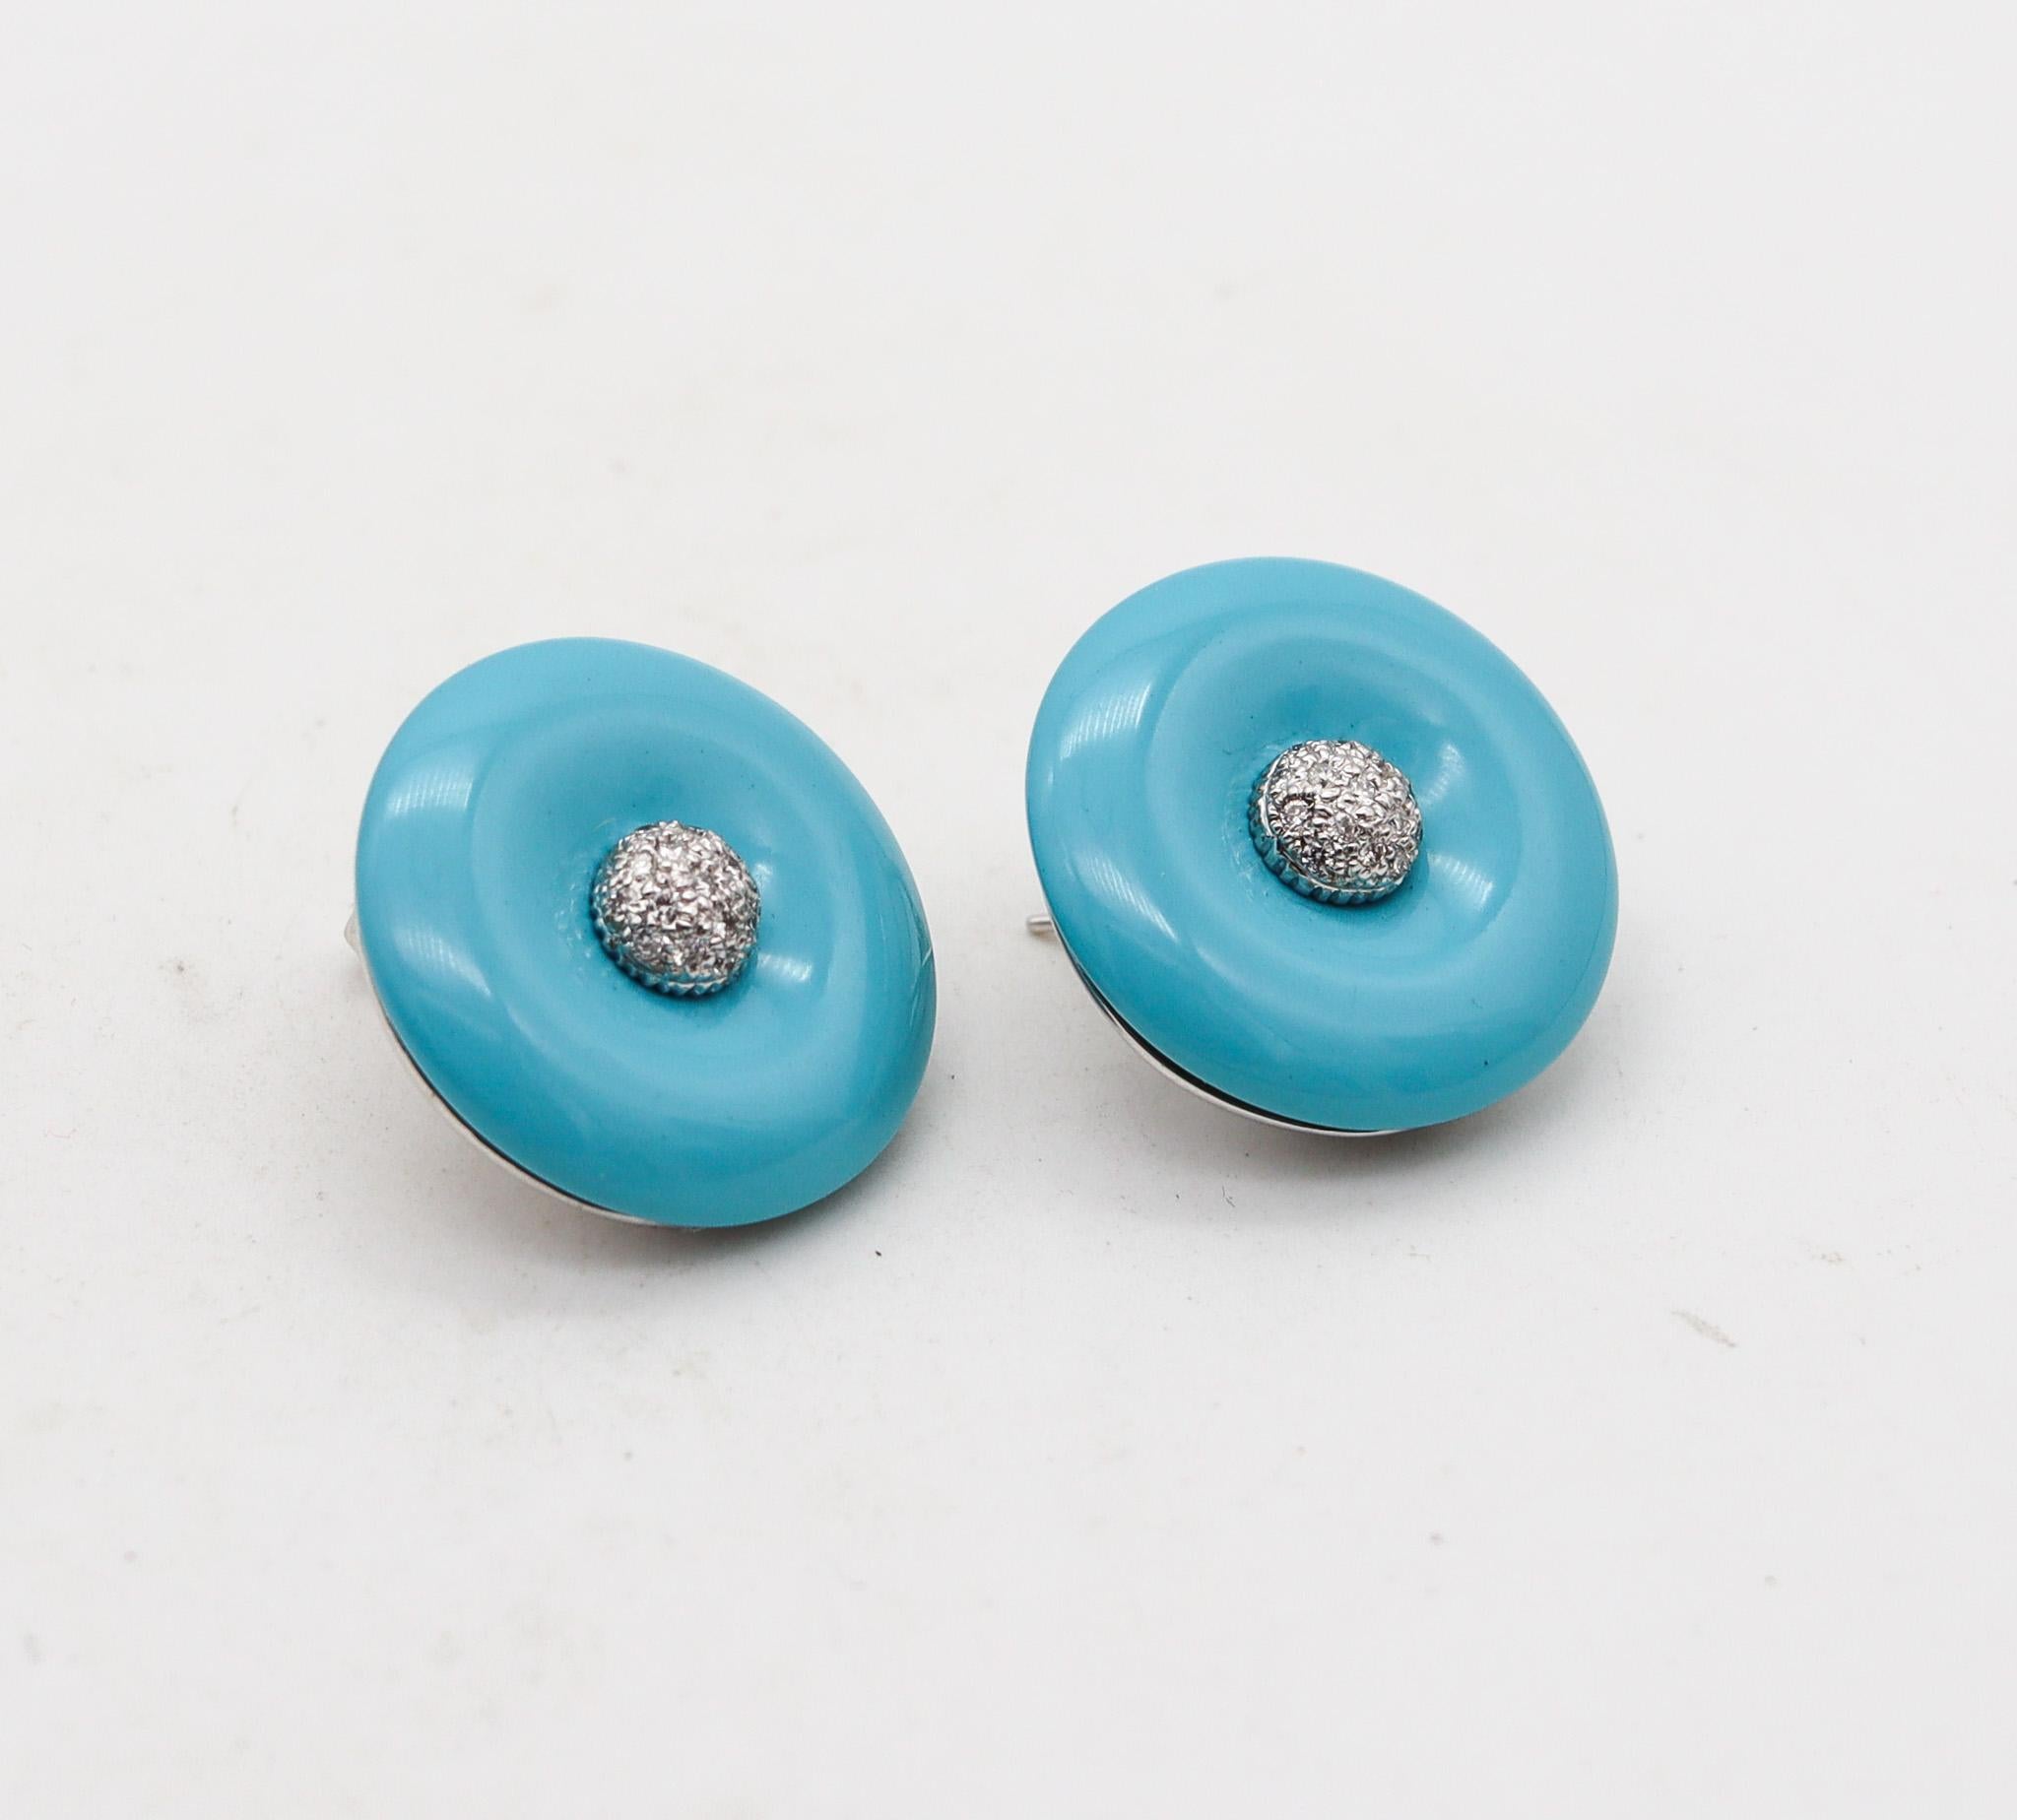 Cabochon Modernist Round Carved Turquoise Earrings In 18Kt White Gold With VS Diamonds For Sale